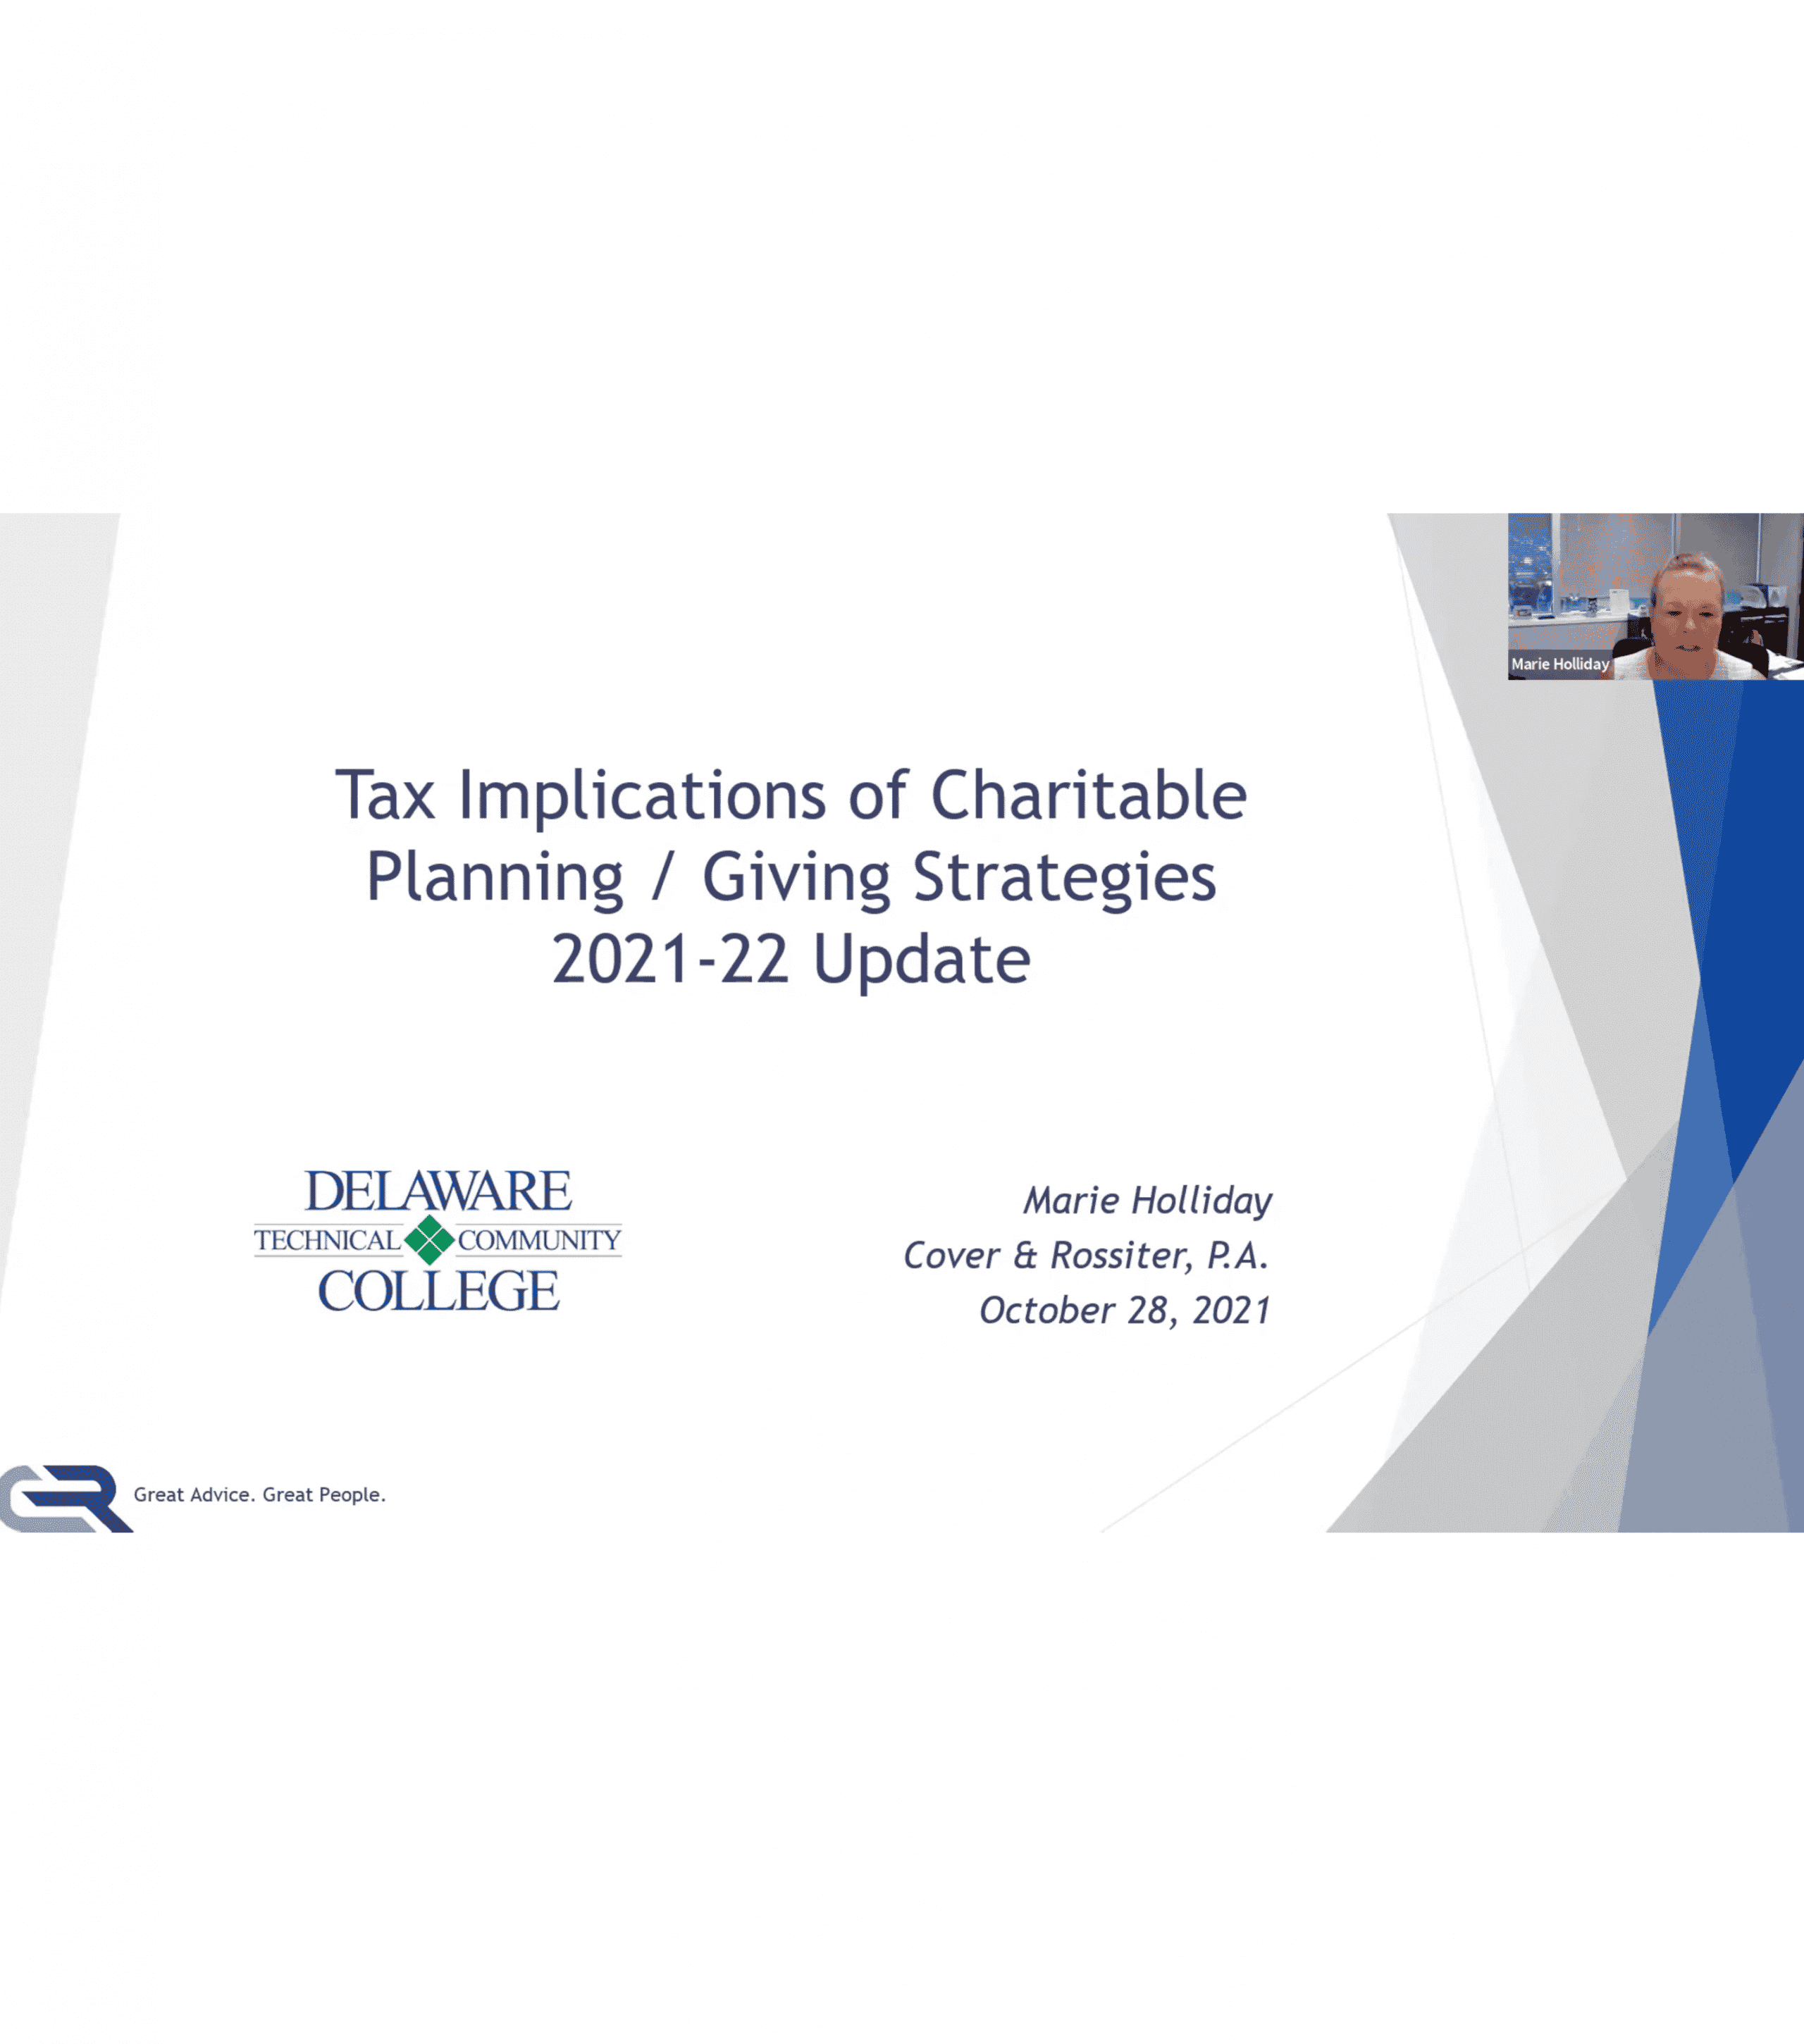 Tax Implications of Charitable Planning/Giving Strategies